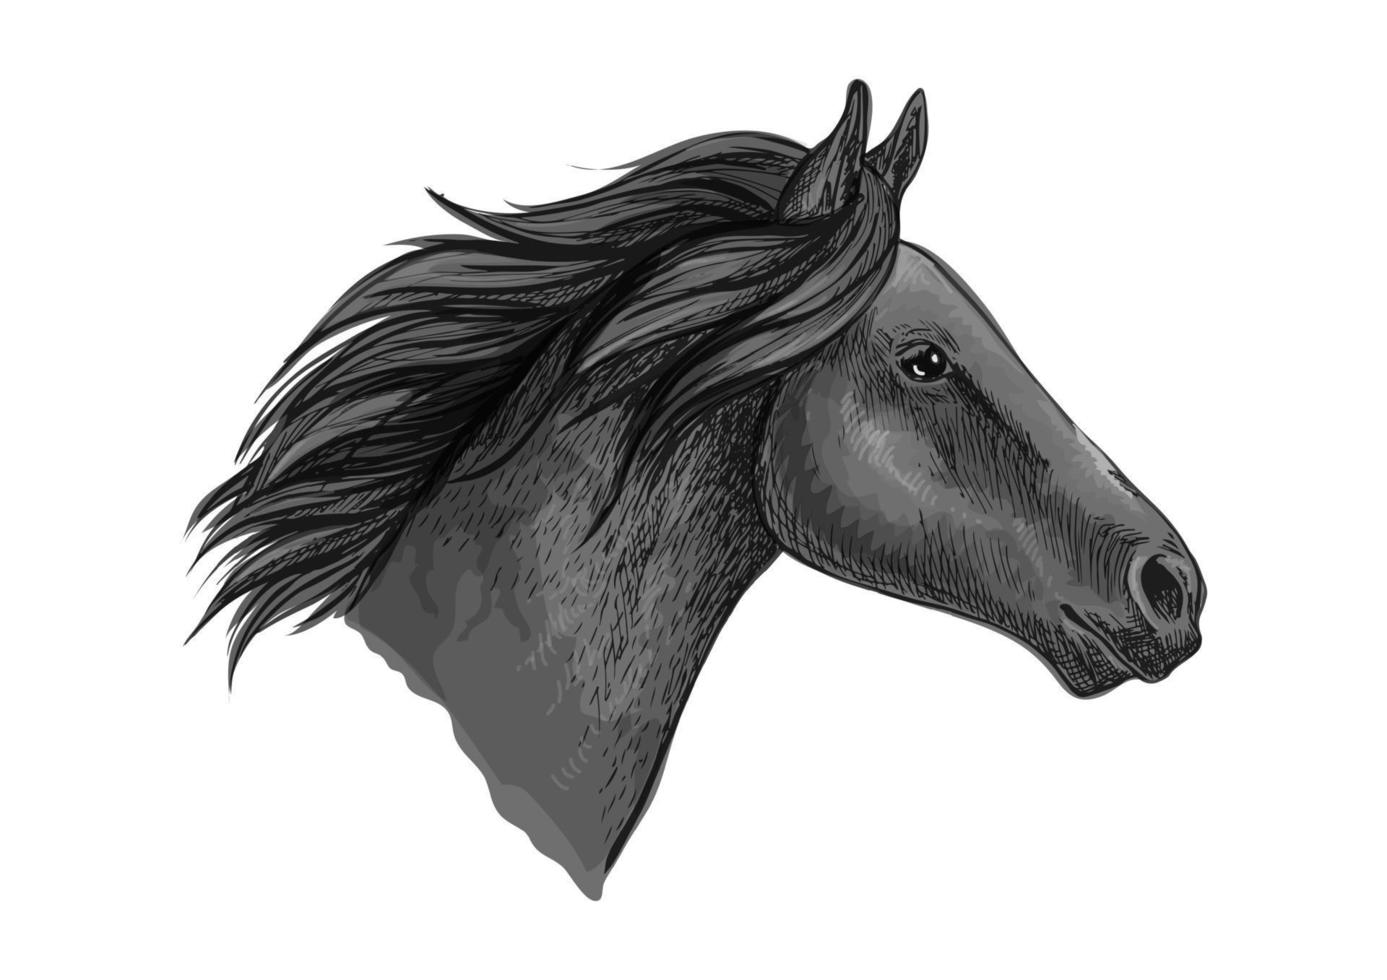 Black stallion horse sketch with racehorse head vector